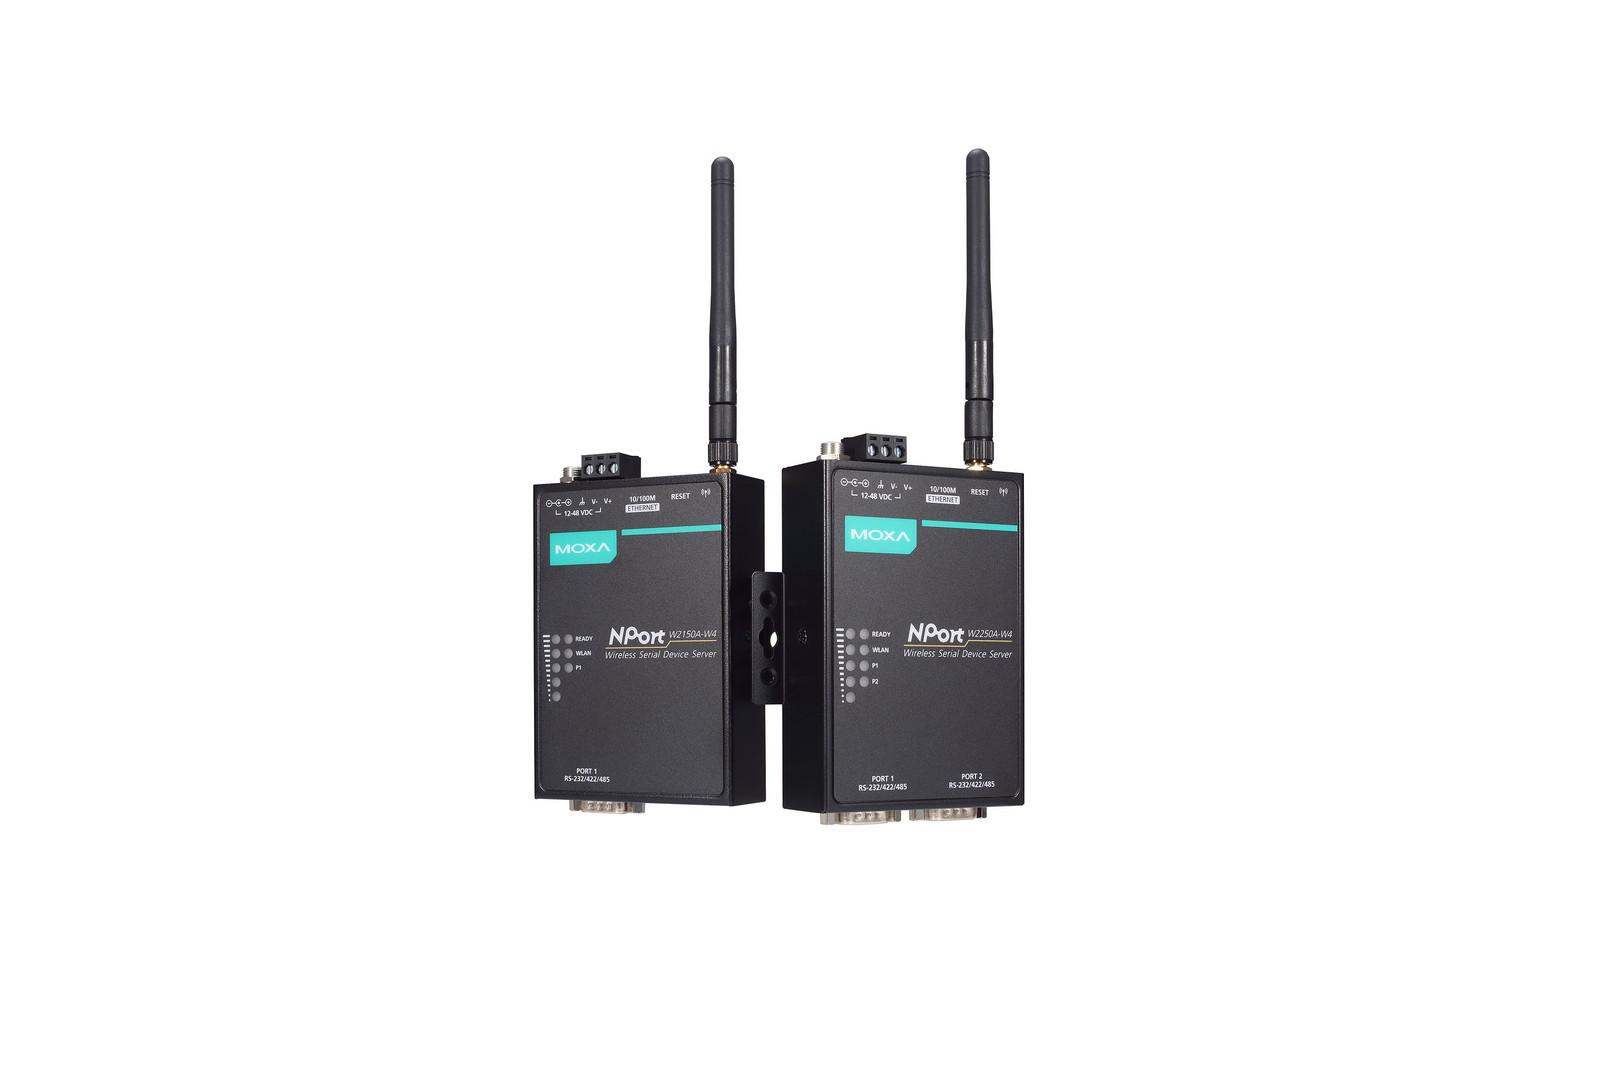 NPort W2150A-W4/W2250A-W4 Series 1 and 2-port serial-to-Wi-Fi (802.11a/b/g/n) device servers with a wireless client